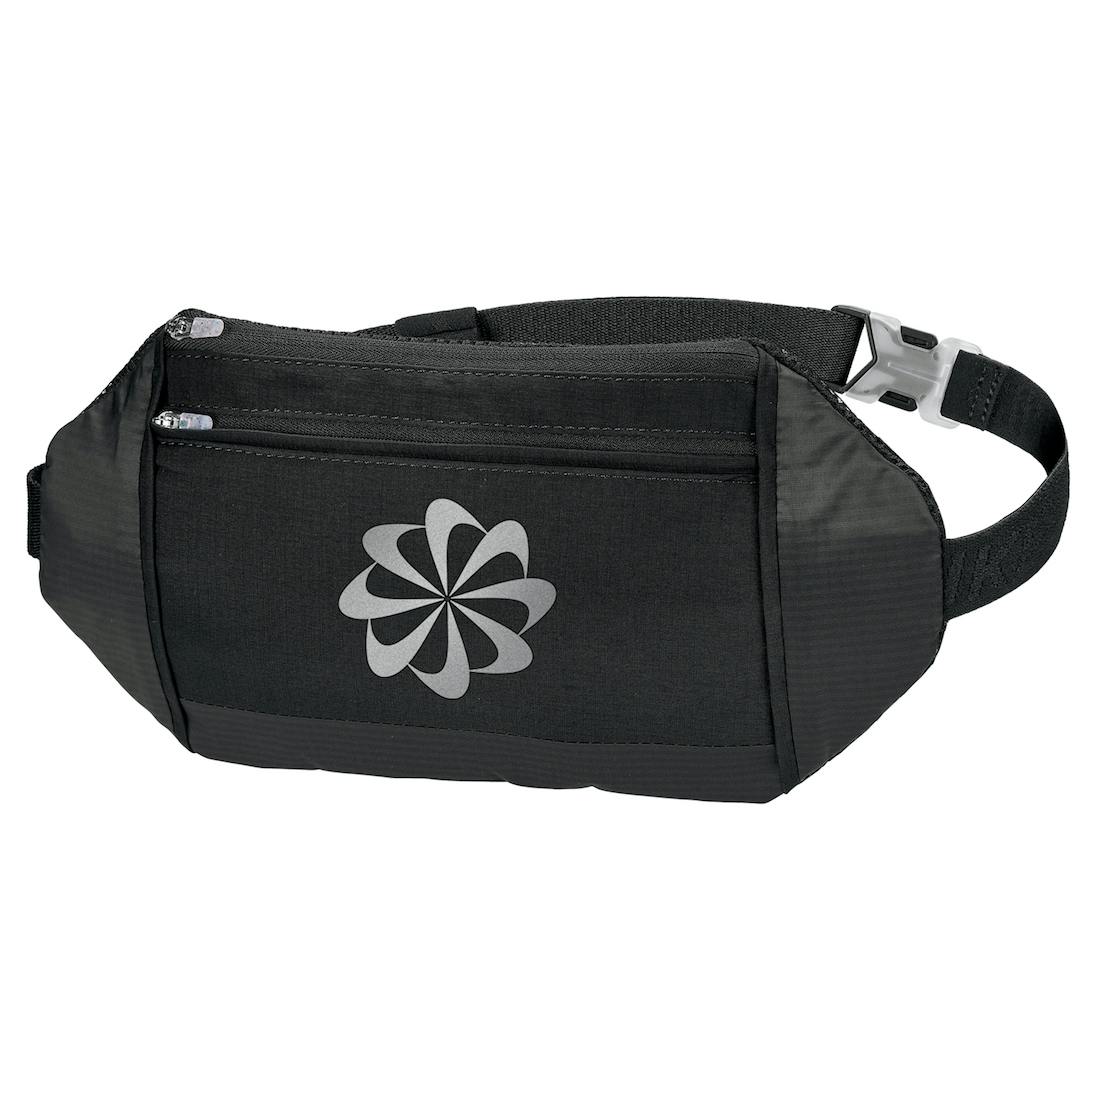 Nike Challenger Waist Pack Large